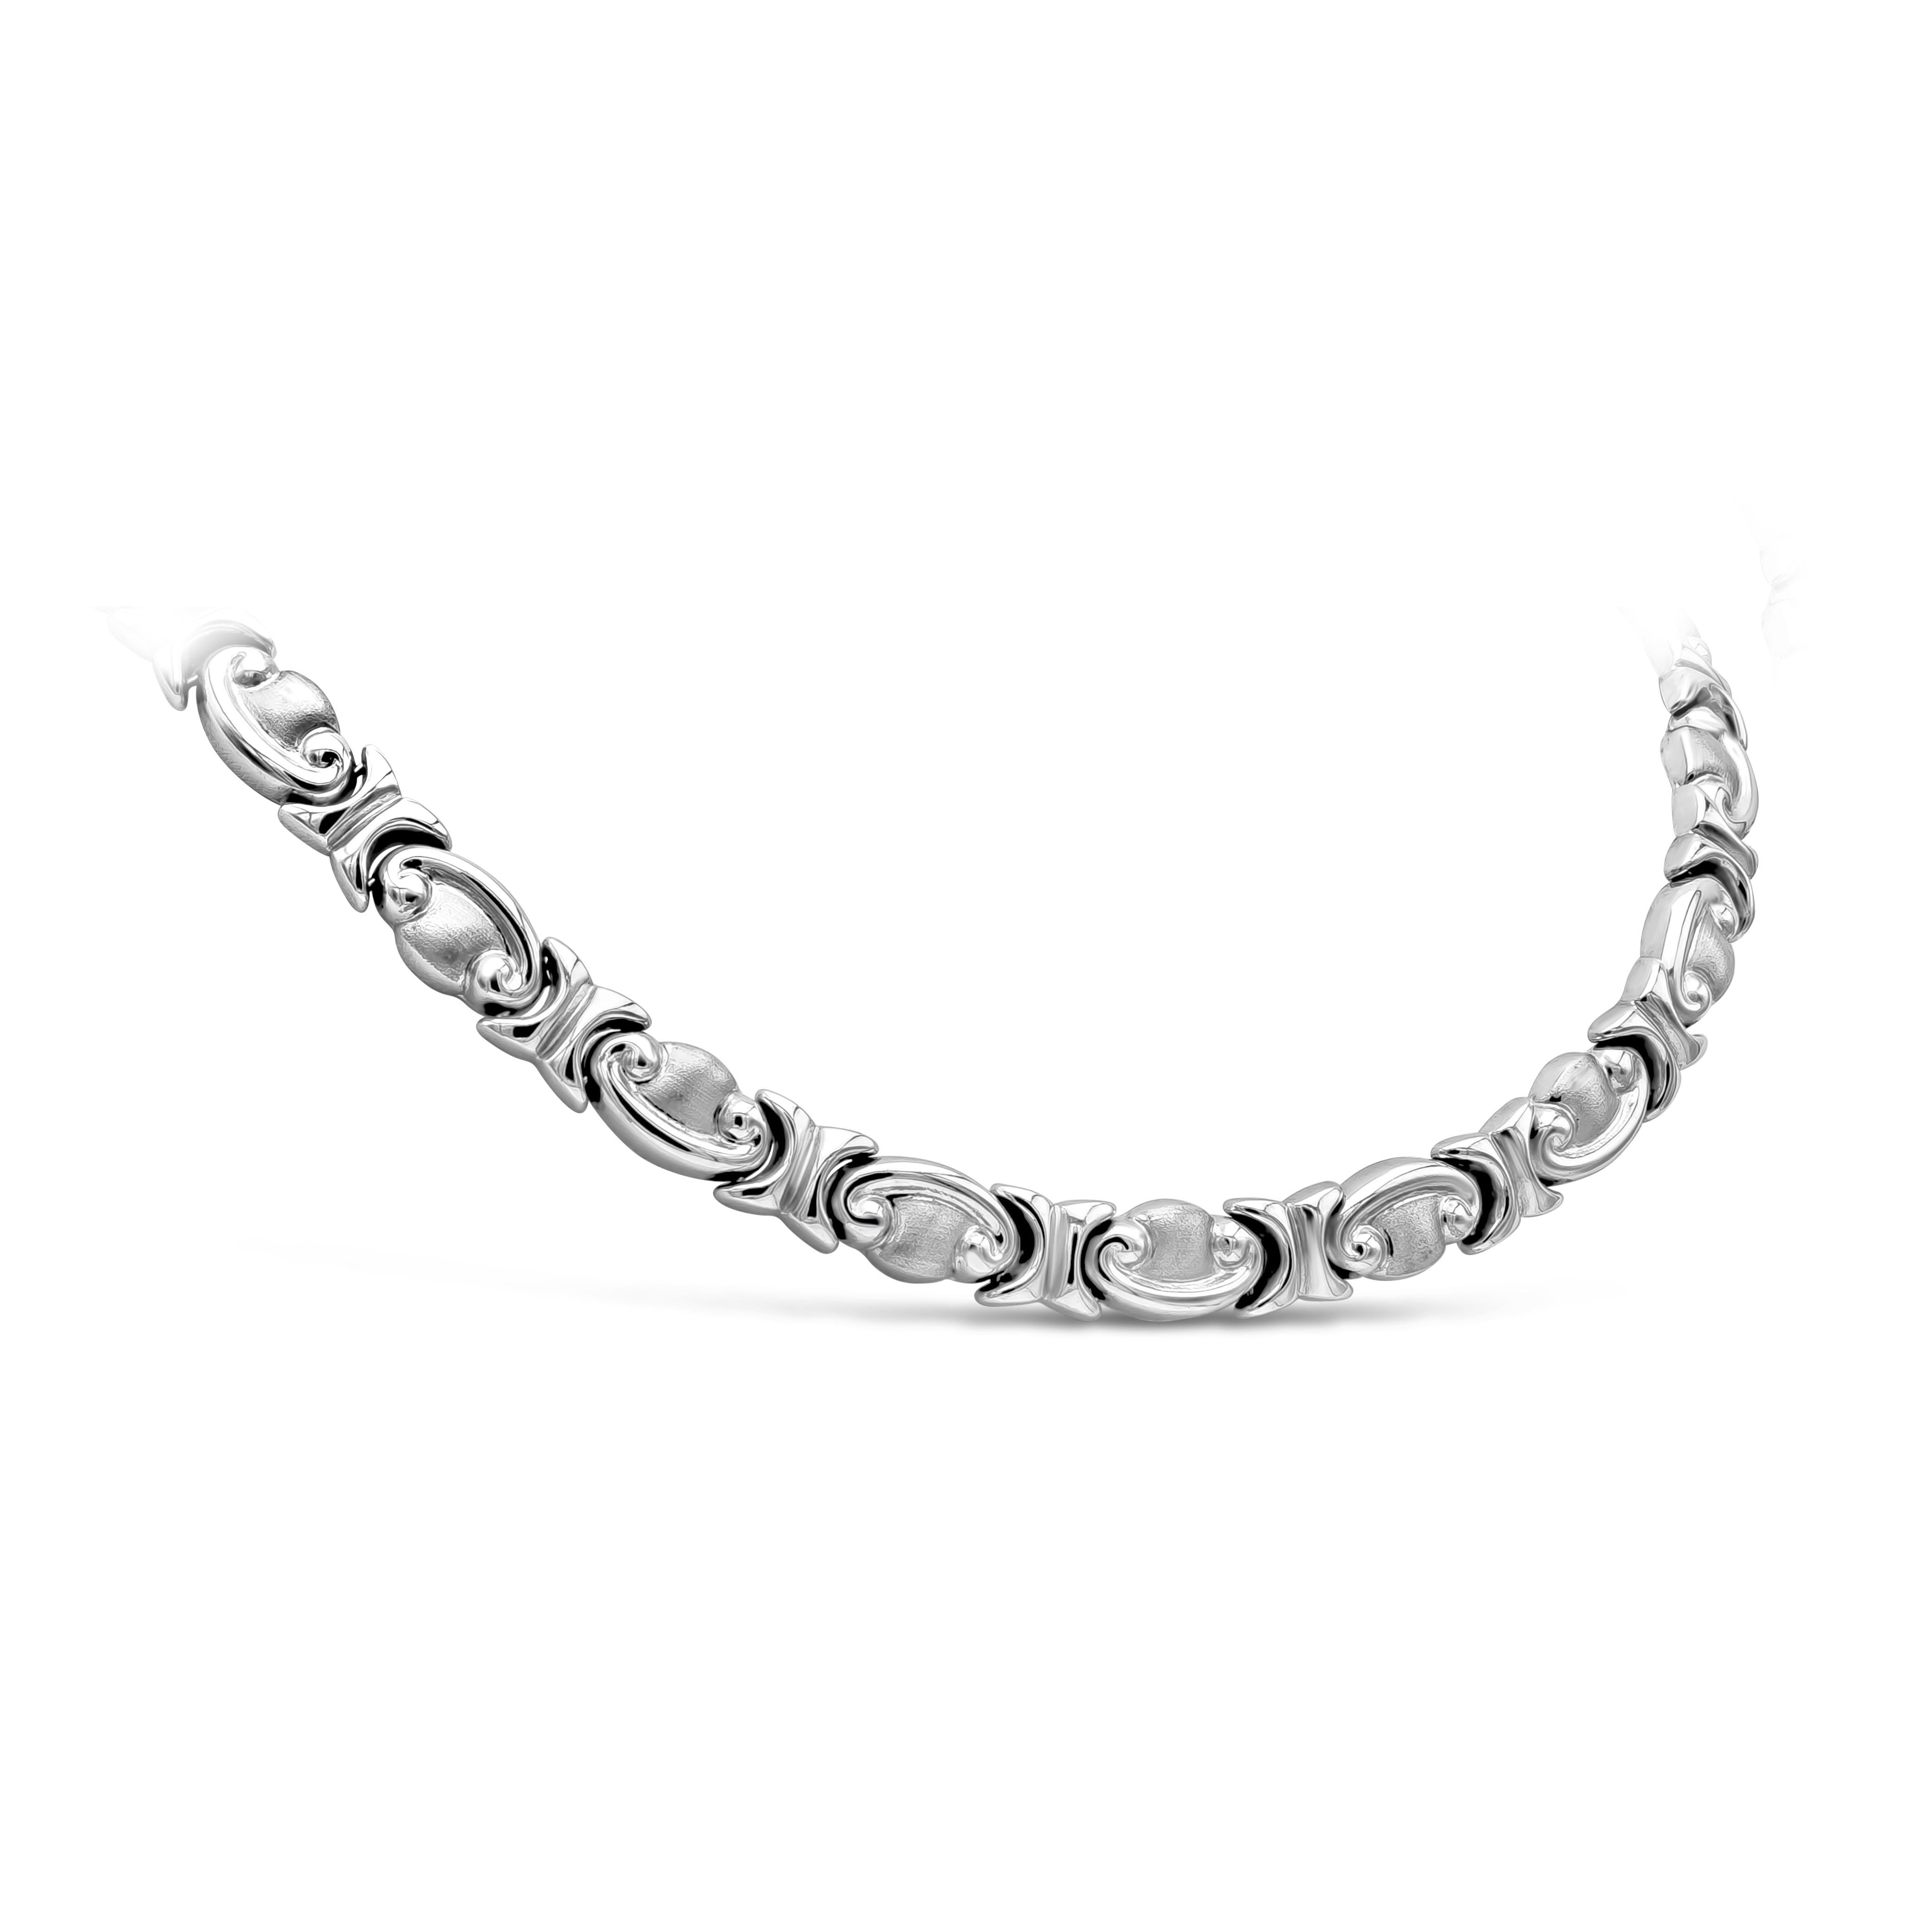 This elegant 14k white gold necklace carved with Ancient Greek Roman style design, weighing 28.62 grams.

Roman Malakov is a custom house, specializing in creating anything you can imagine. If you would like to receive a special quote on a custom